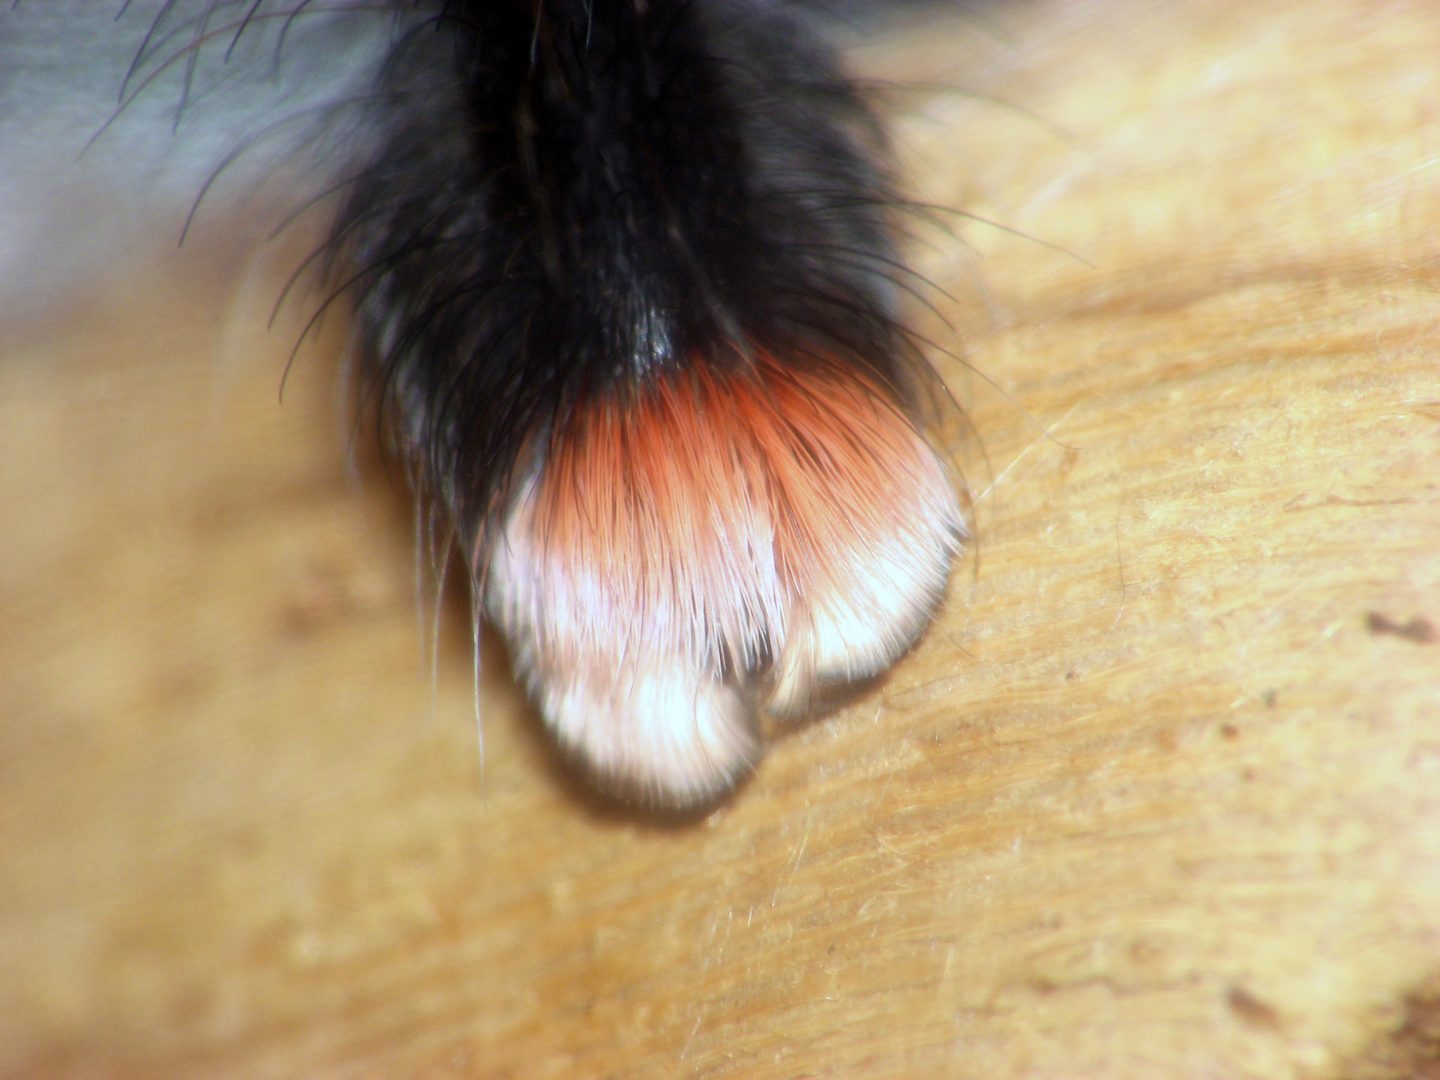 The science spider paws